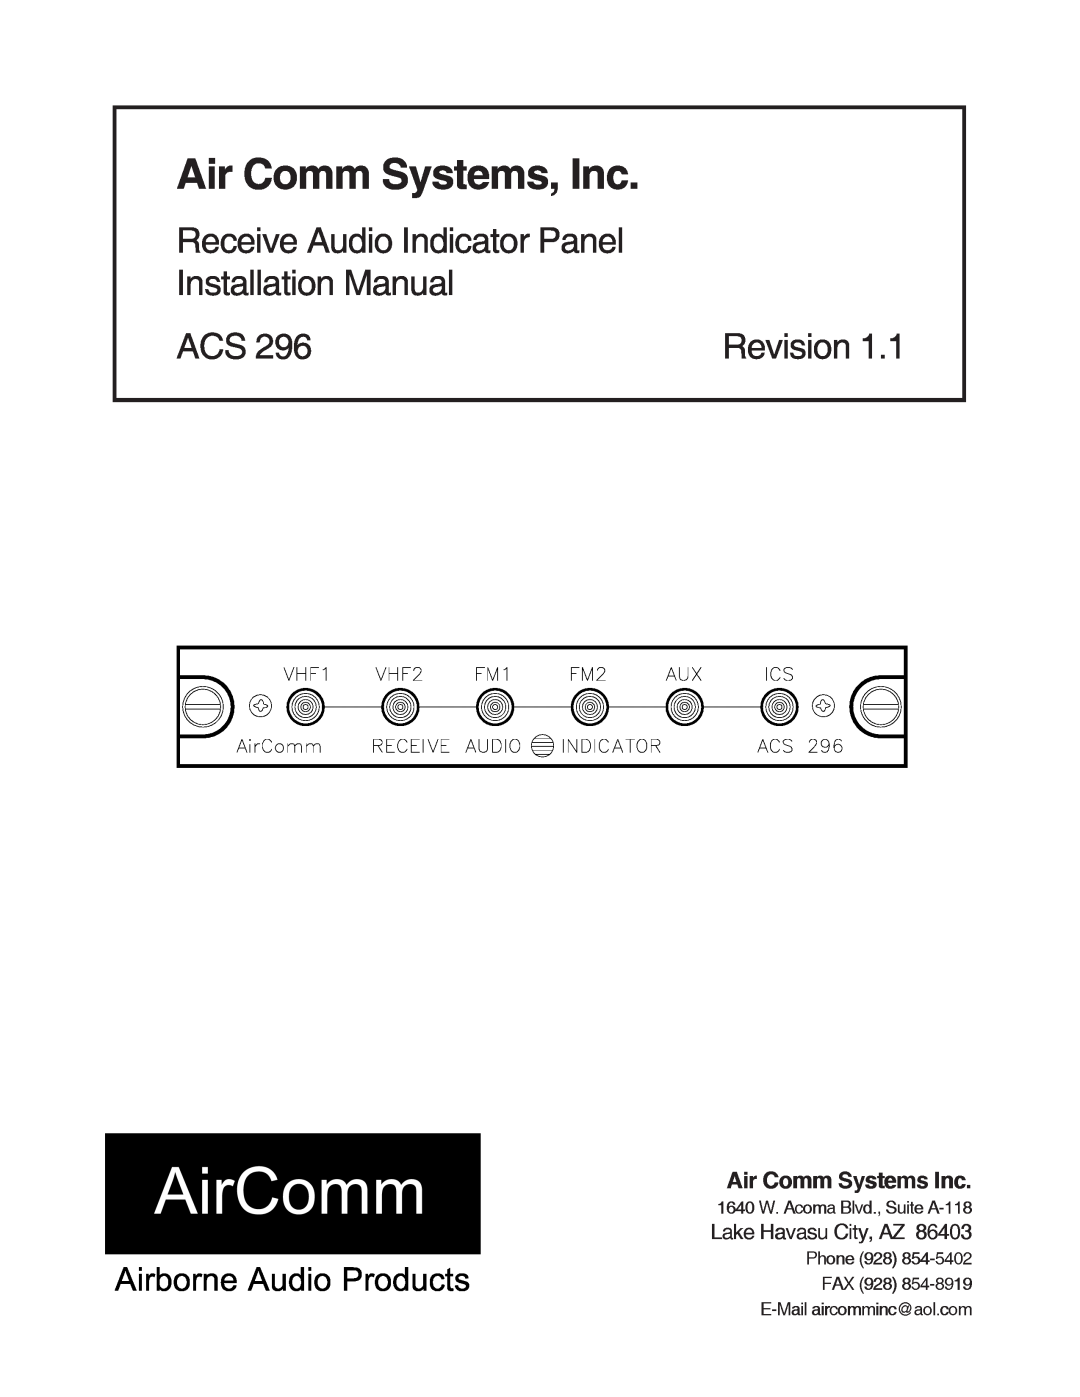 Air Comm Systems ACS 296 installation manual Revision, AirComm, Air Comm Systems, Inc, Airborne Audio Products 